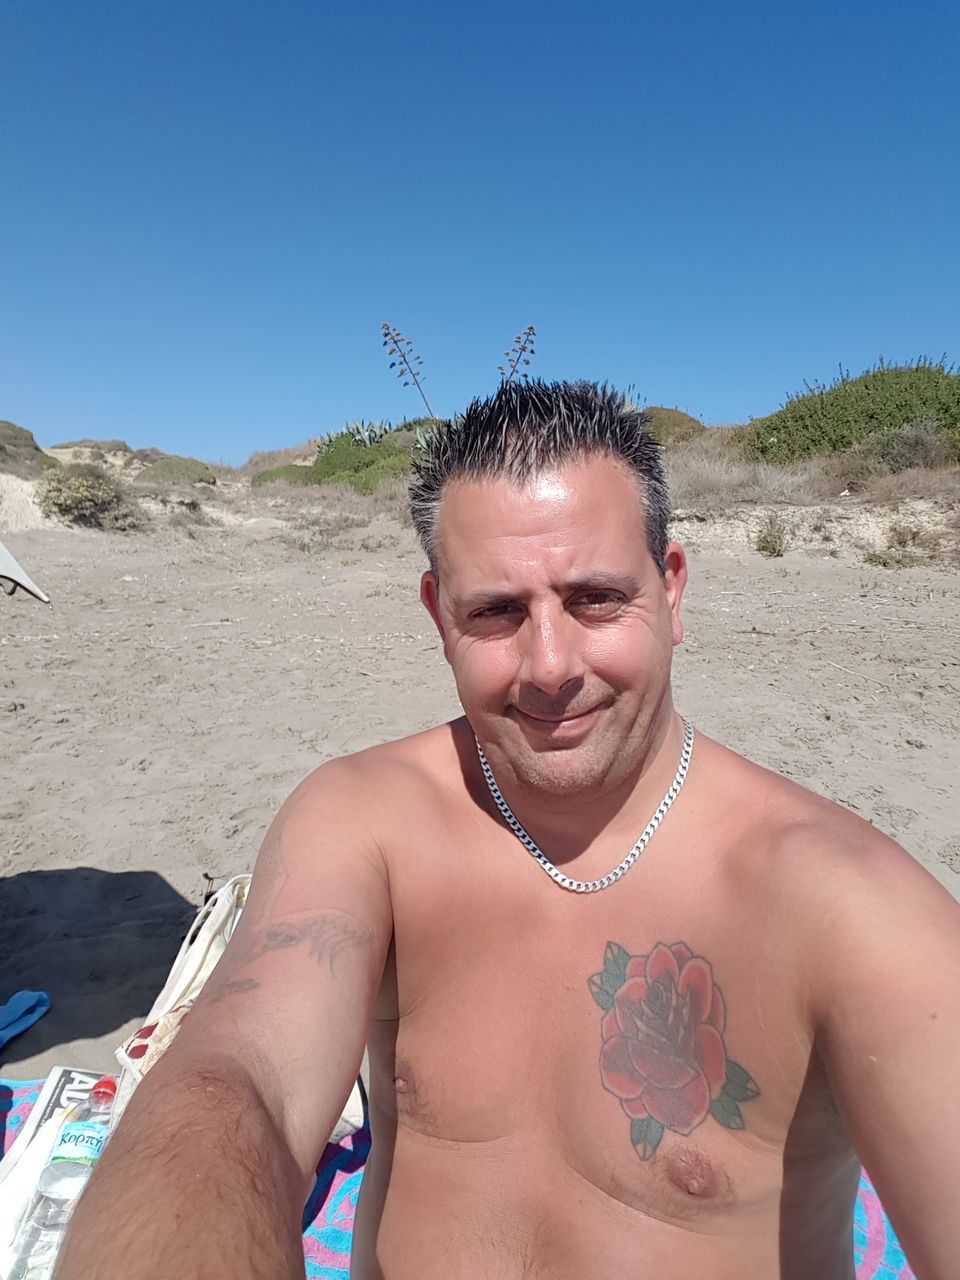 shirtless, sand, real people, beach, one person, vacations, leisure activity, front view, outdoors, day, nature, lifestyles, mature men, looking at camera, young adult, portrait, clear sky, summer, desert, beauty in nature, tree, sand dune, sky, mammal